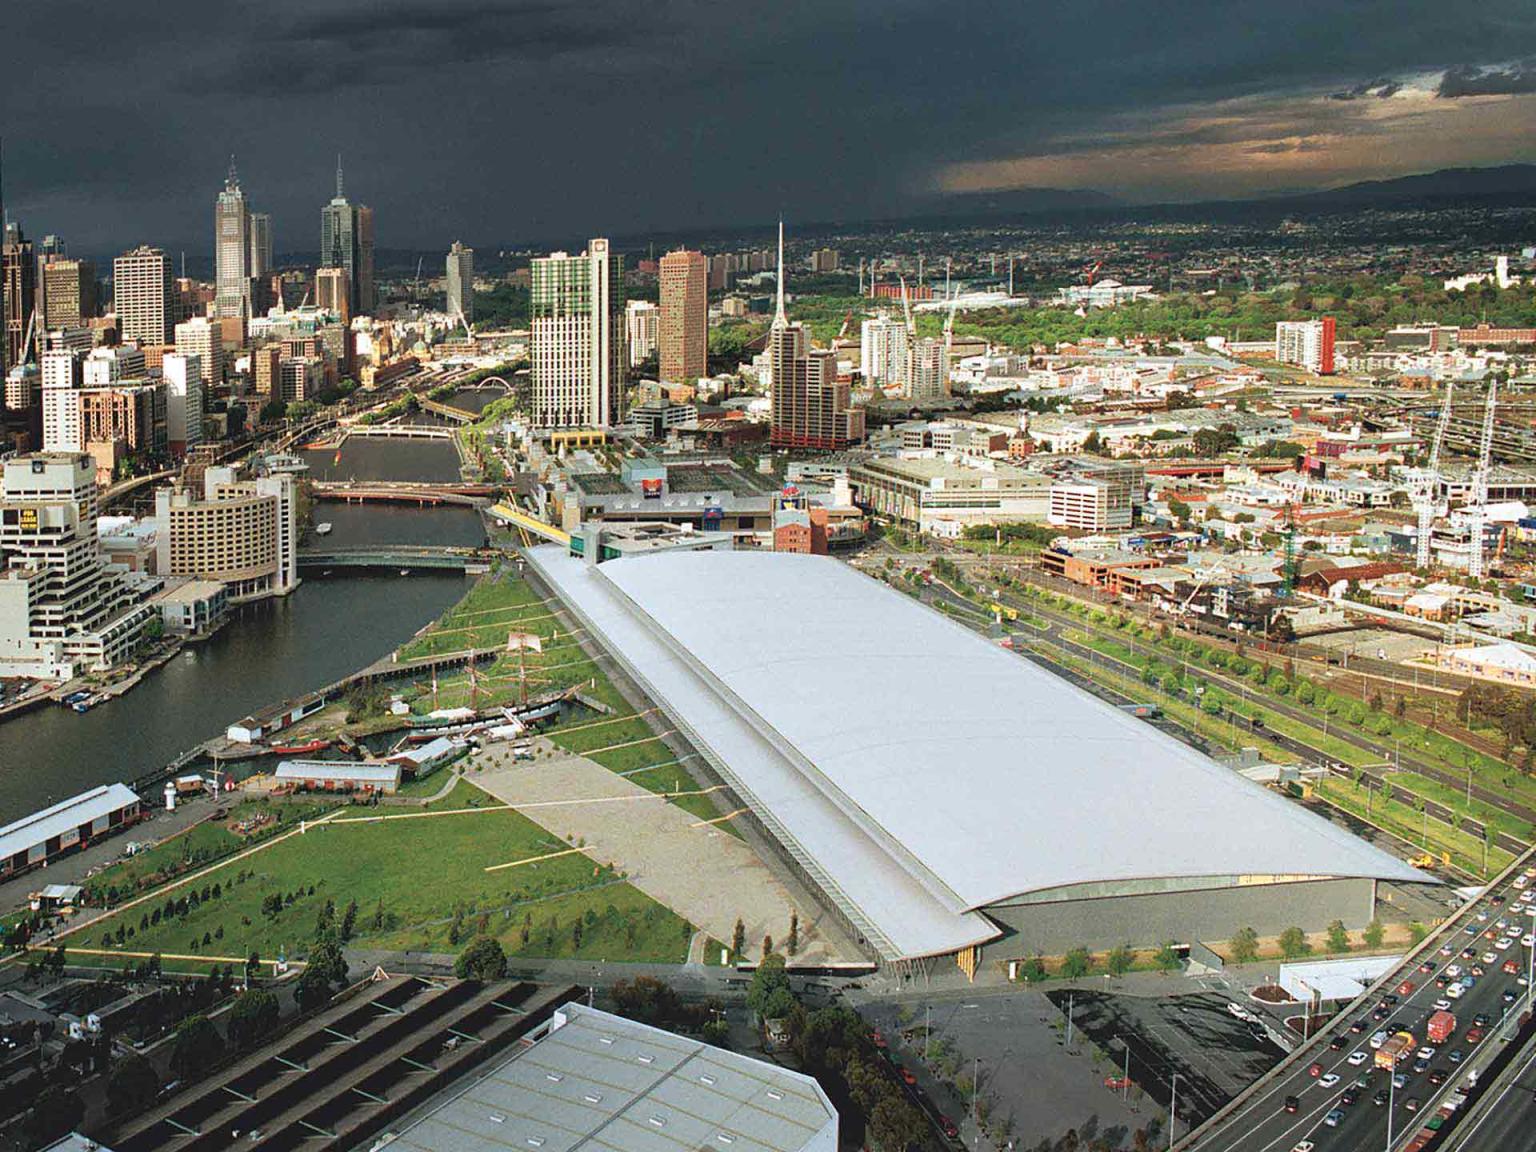 View from high in the sky of the Melbourne Exhibition building. The new convention centre can been seen in the bottom of the image under construction. Dark blue skies are on the horizon. 